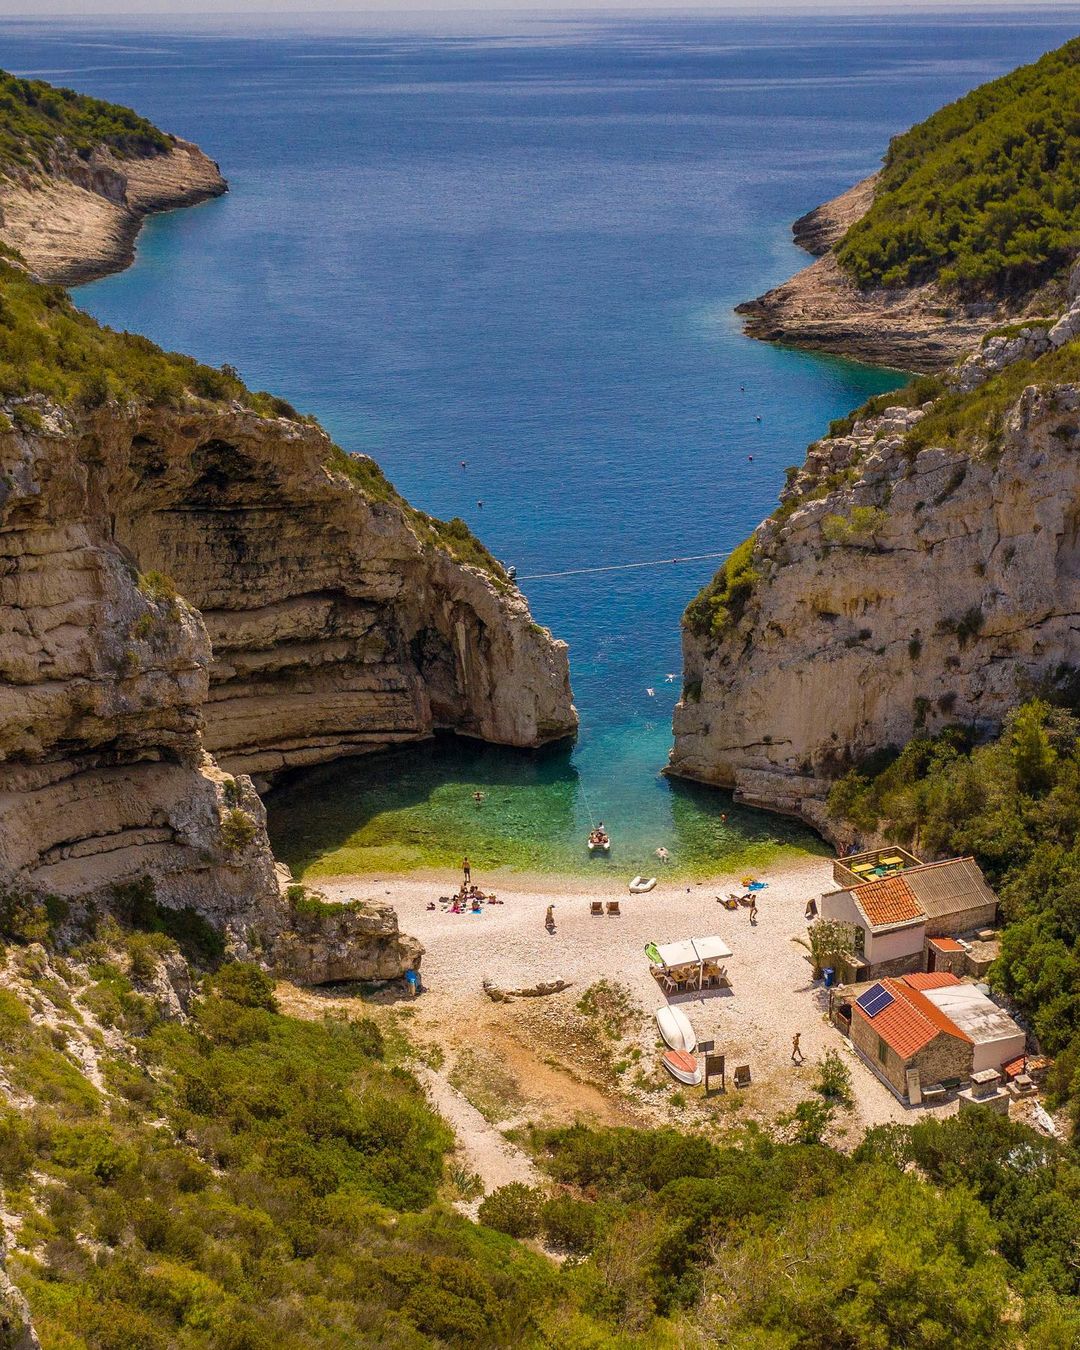 Stiniva is one of the most photographed beaches in Europe